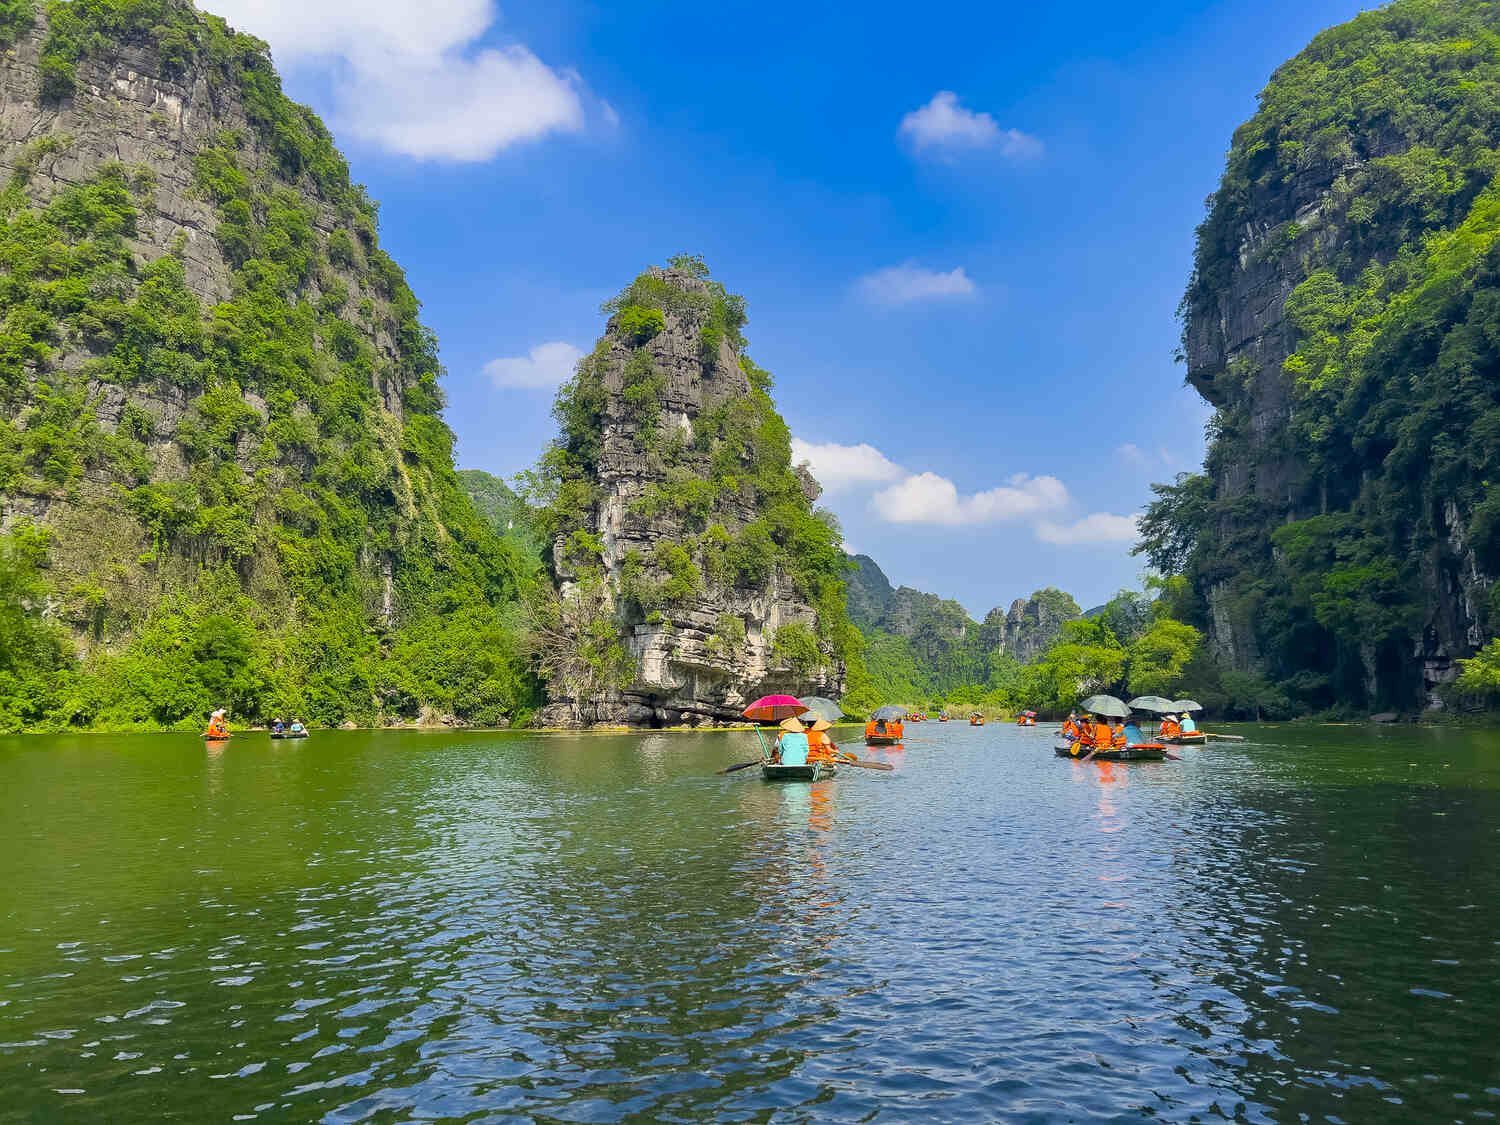 Boat ride amidst the towering limestone karsts of Tam Coc in Ninh Binh.